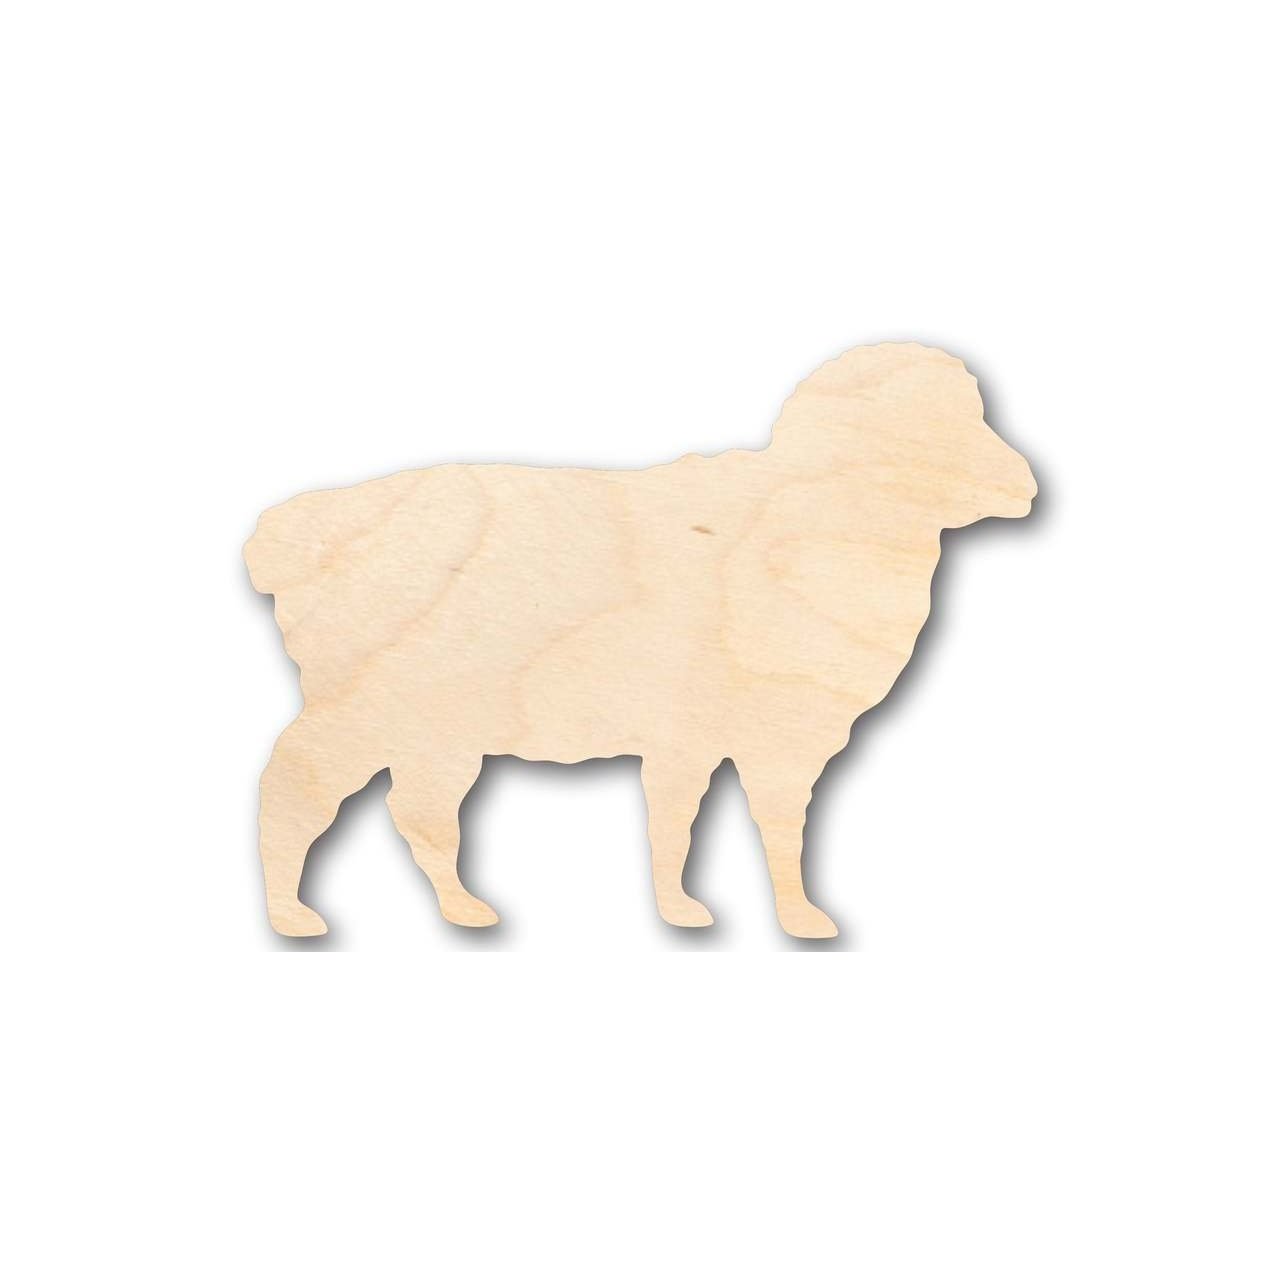 Unfinished Wooden Sheep Shape - Farm Animal - Craft - up to 24